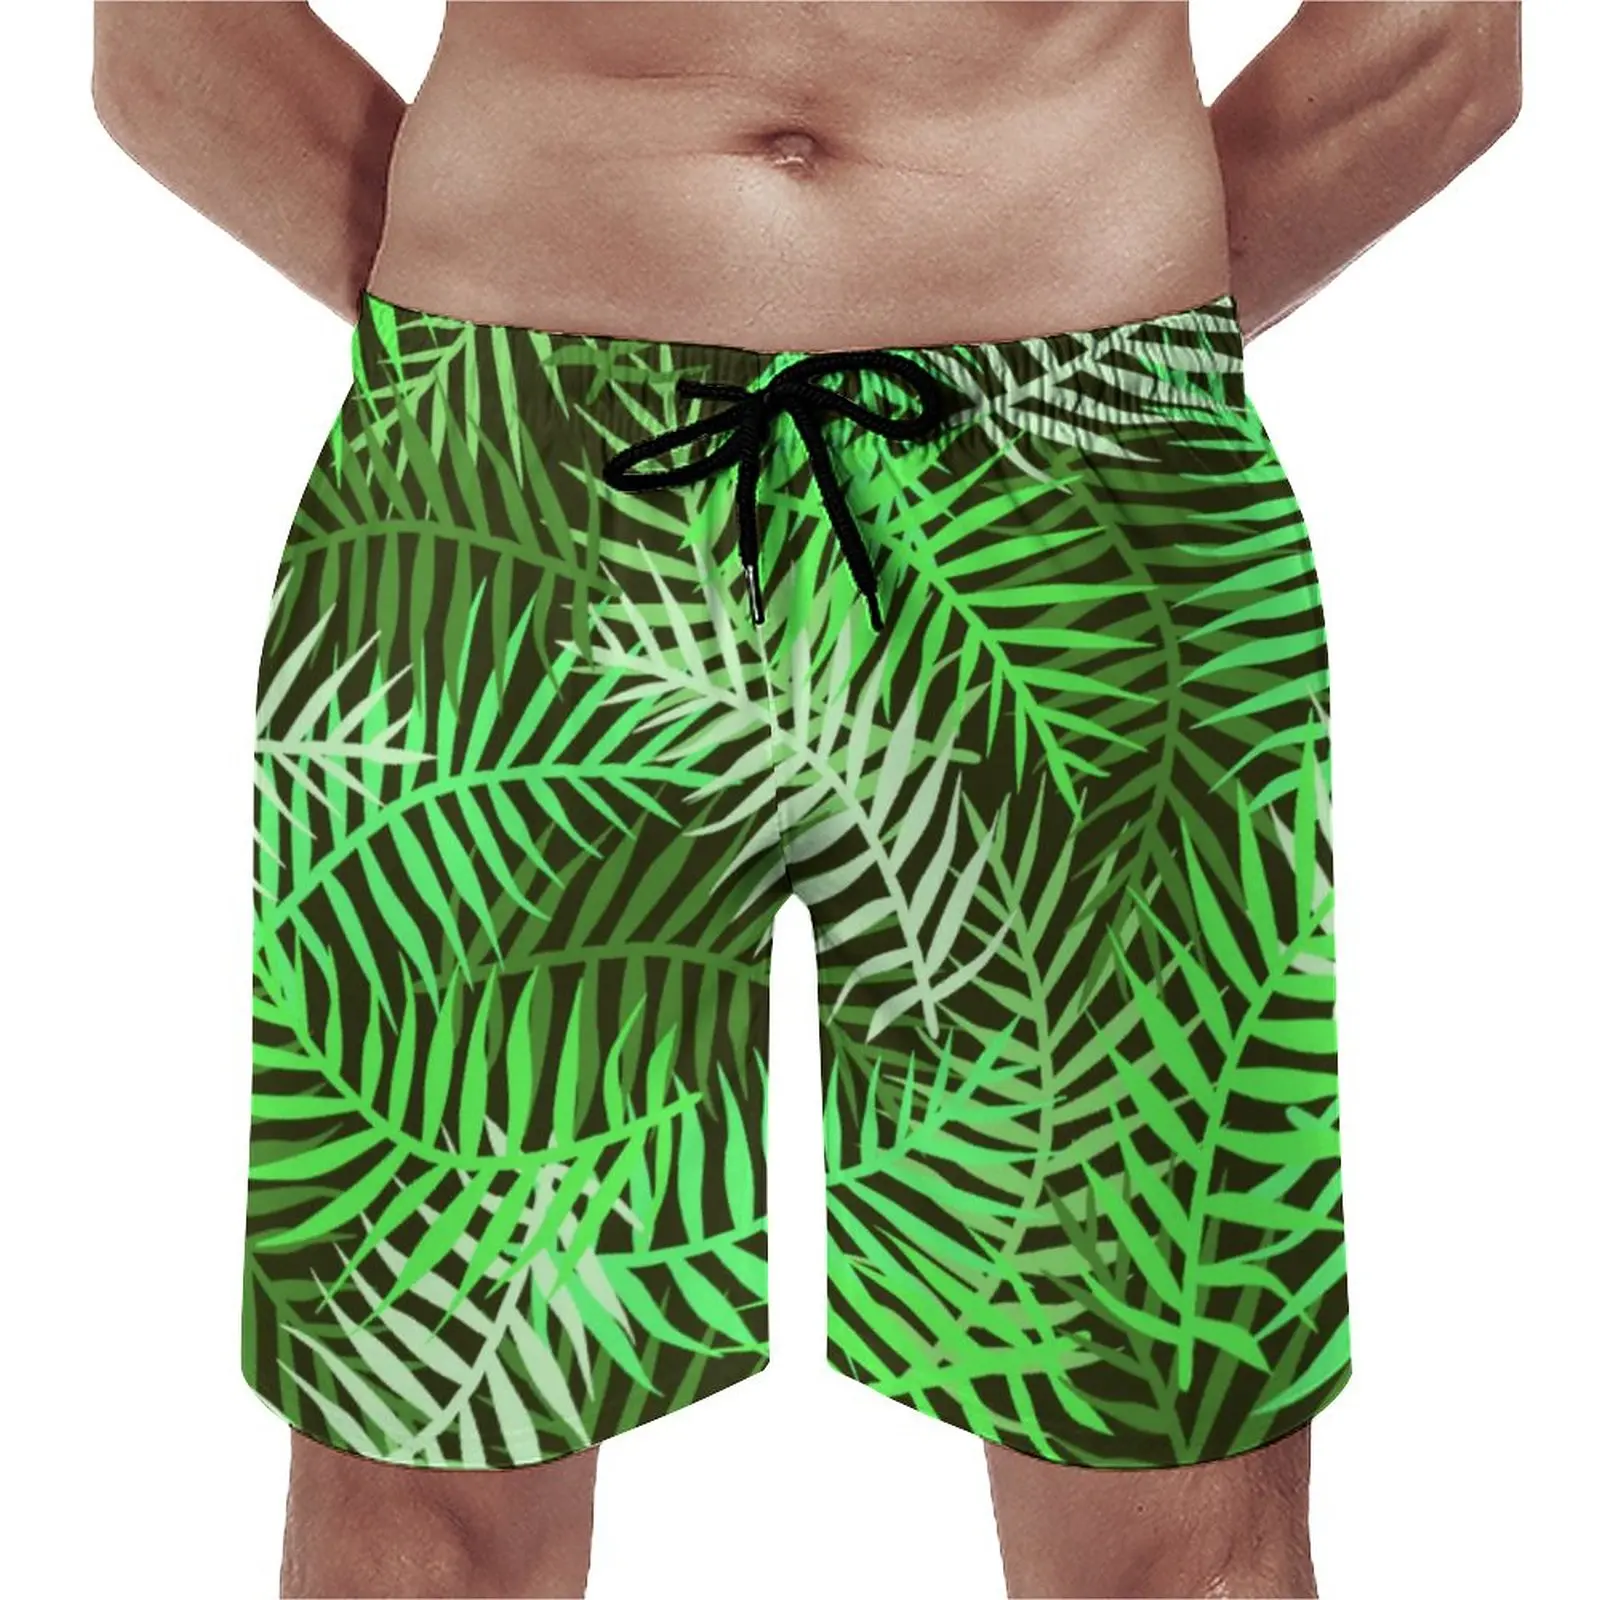 

Tropical Palm Leaves Board Shorts Green Leaf Vintage Beach Shorts Men's Pattern Surfing Quick Dry Beach Trunks Birthday Present